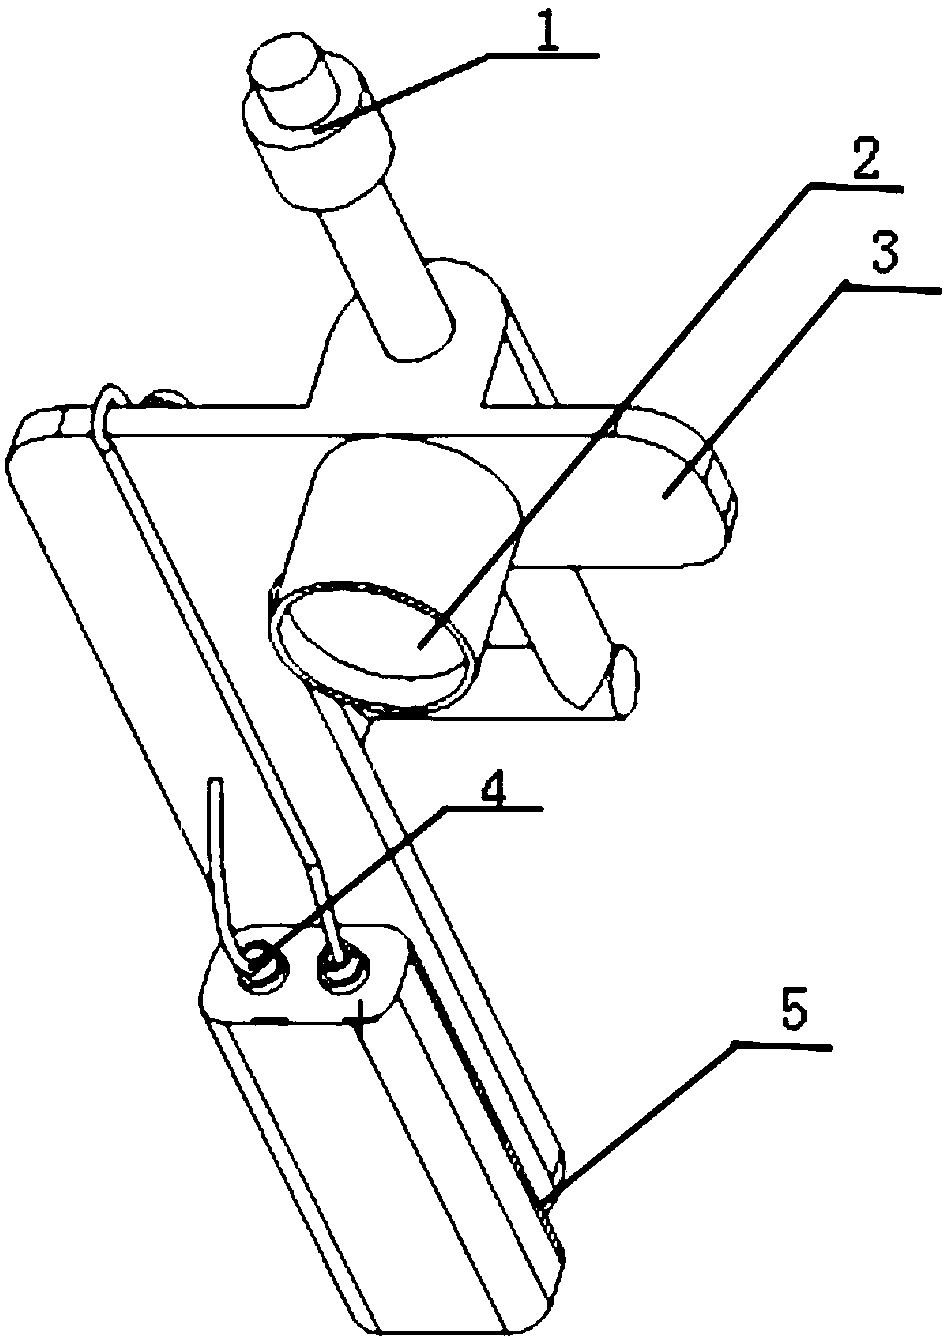 A device for checking and adjusting double-acting clutch and brake travel